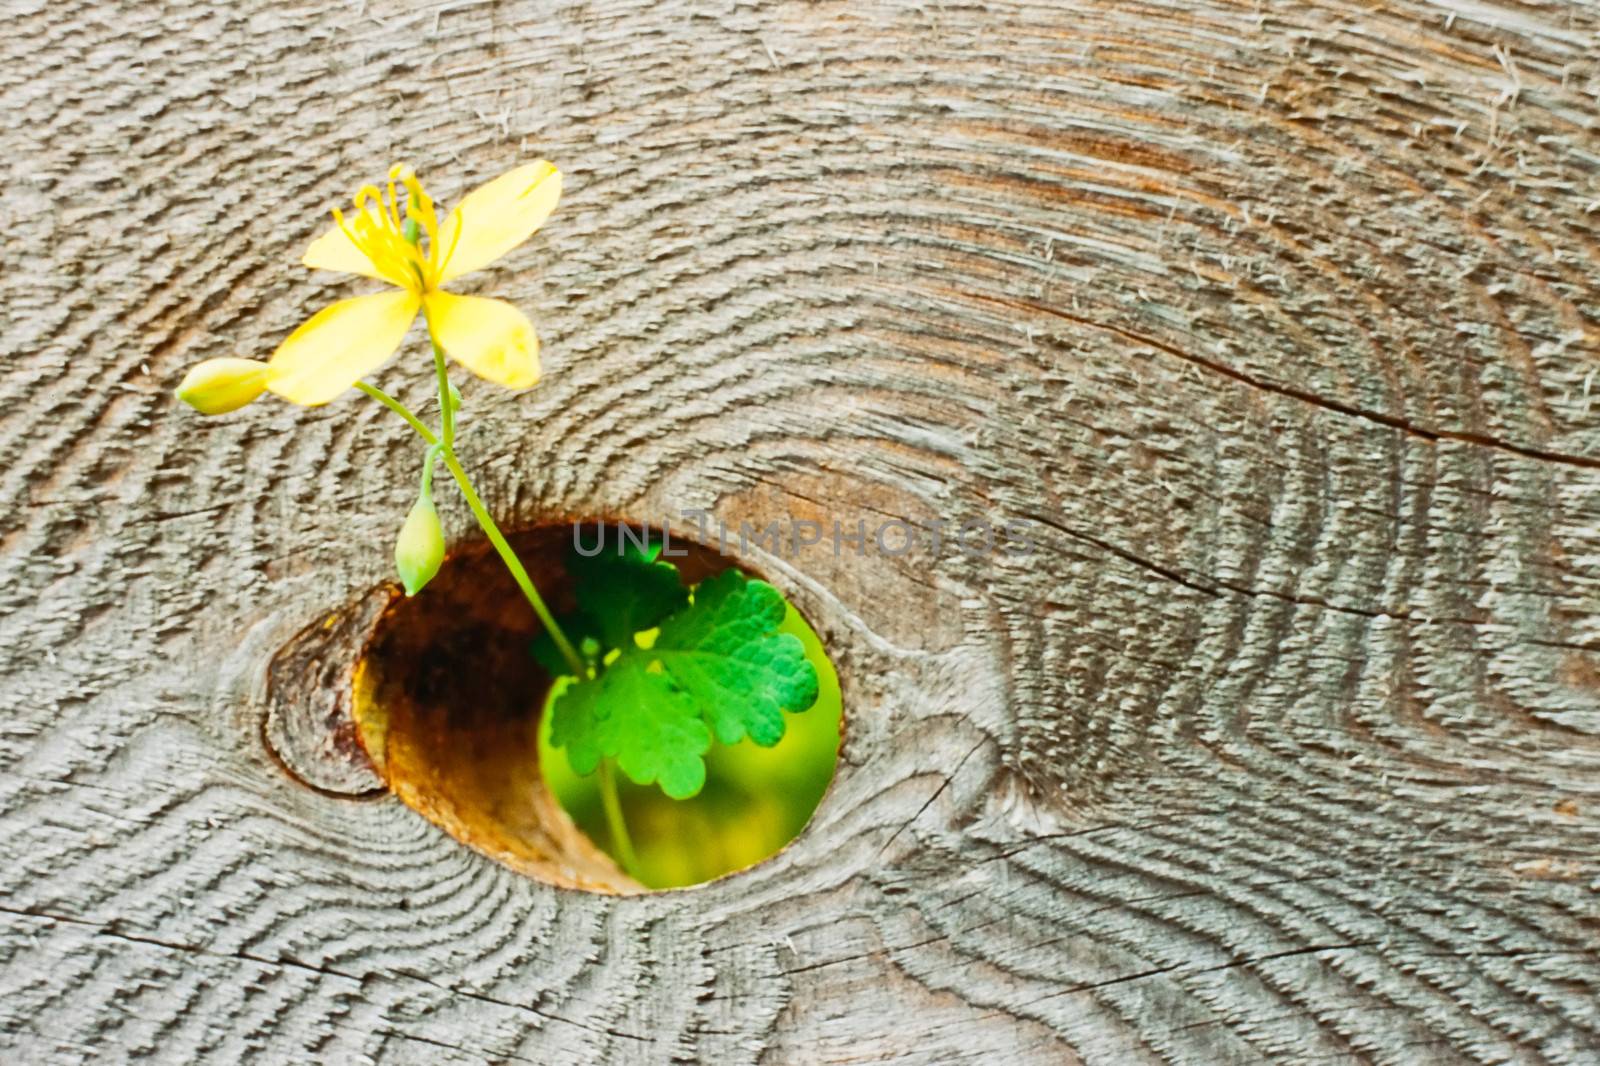 Yellow flower grows through wooden board knothole by PiLens